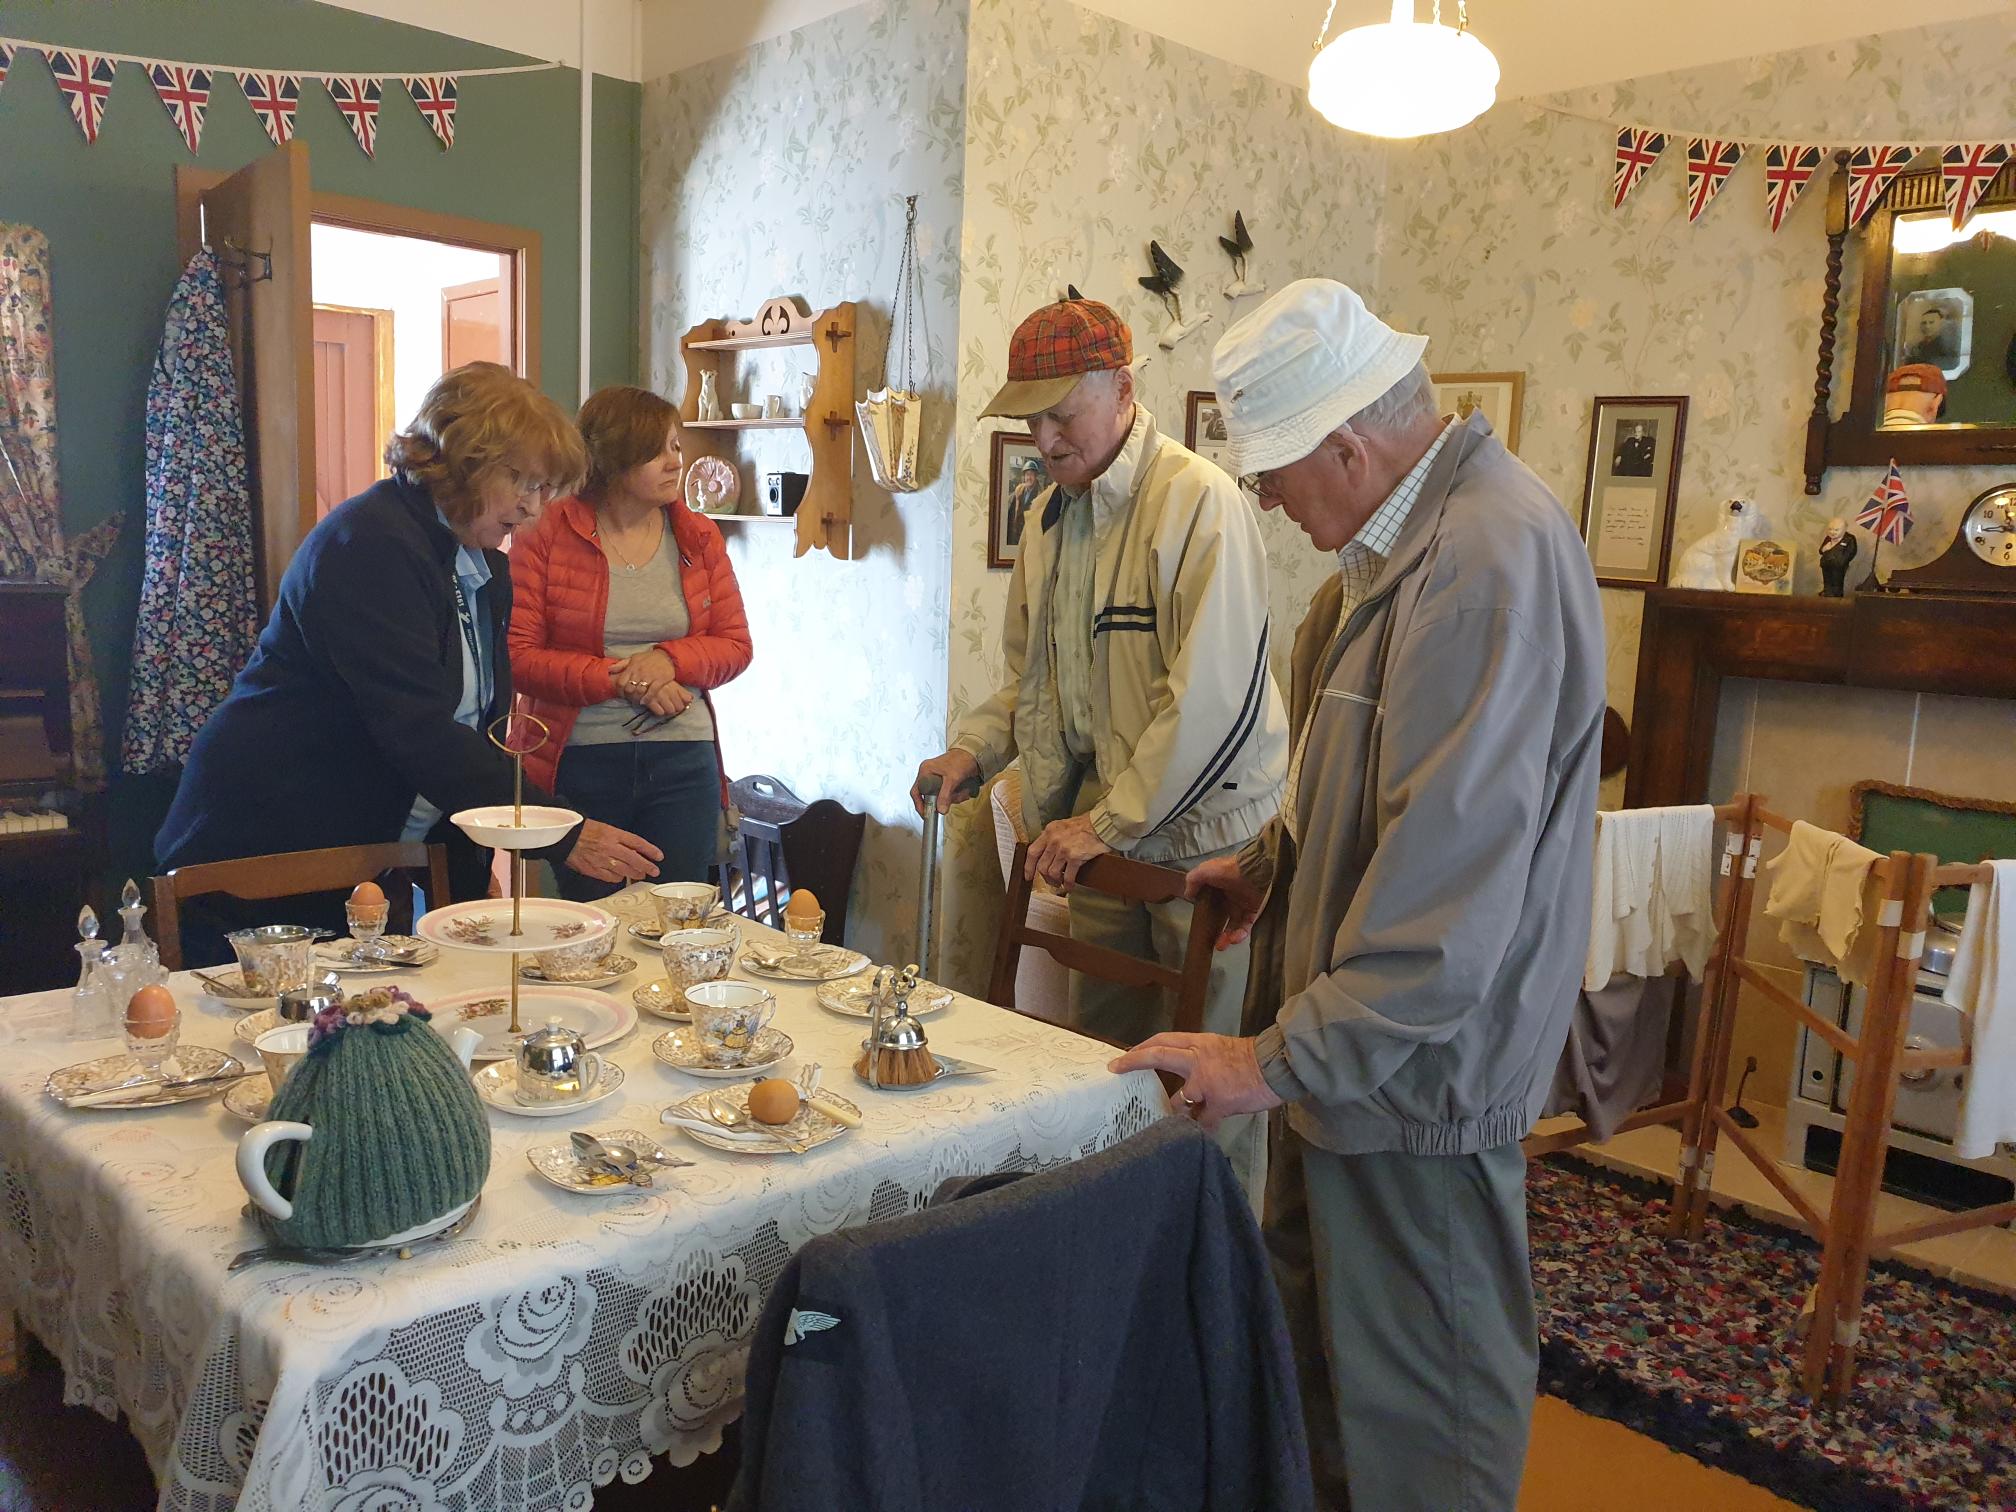 Group members visit a historic tea table set up